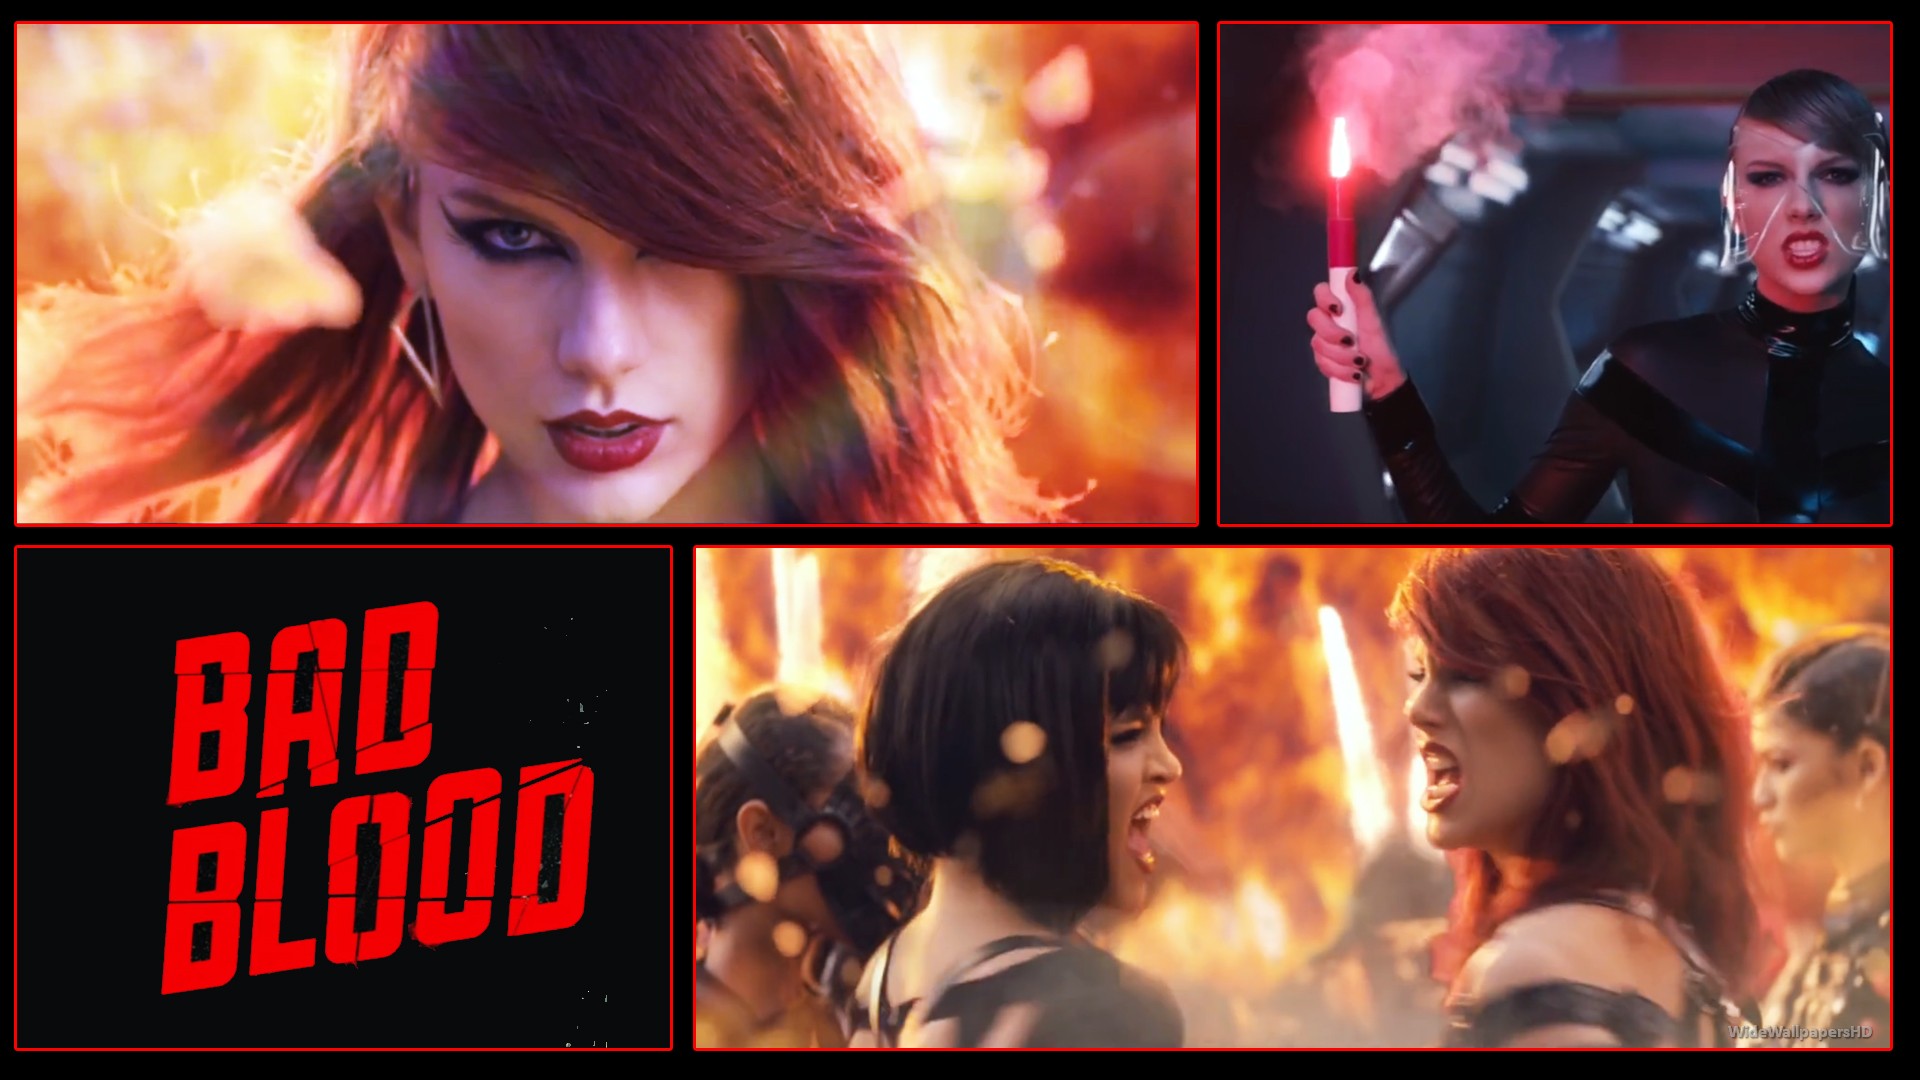 Taylor Swift Song Bad Blood Songs Wallpaper